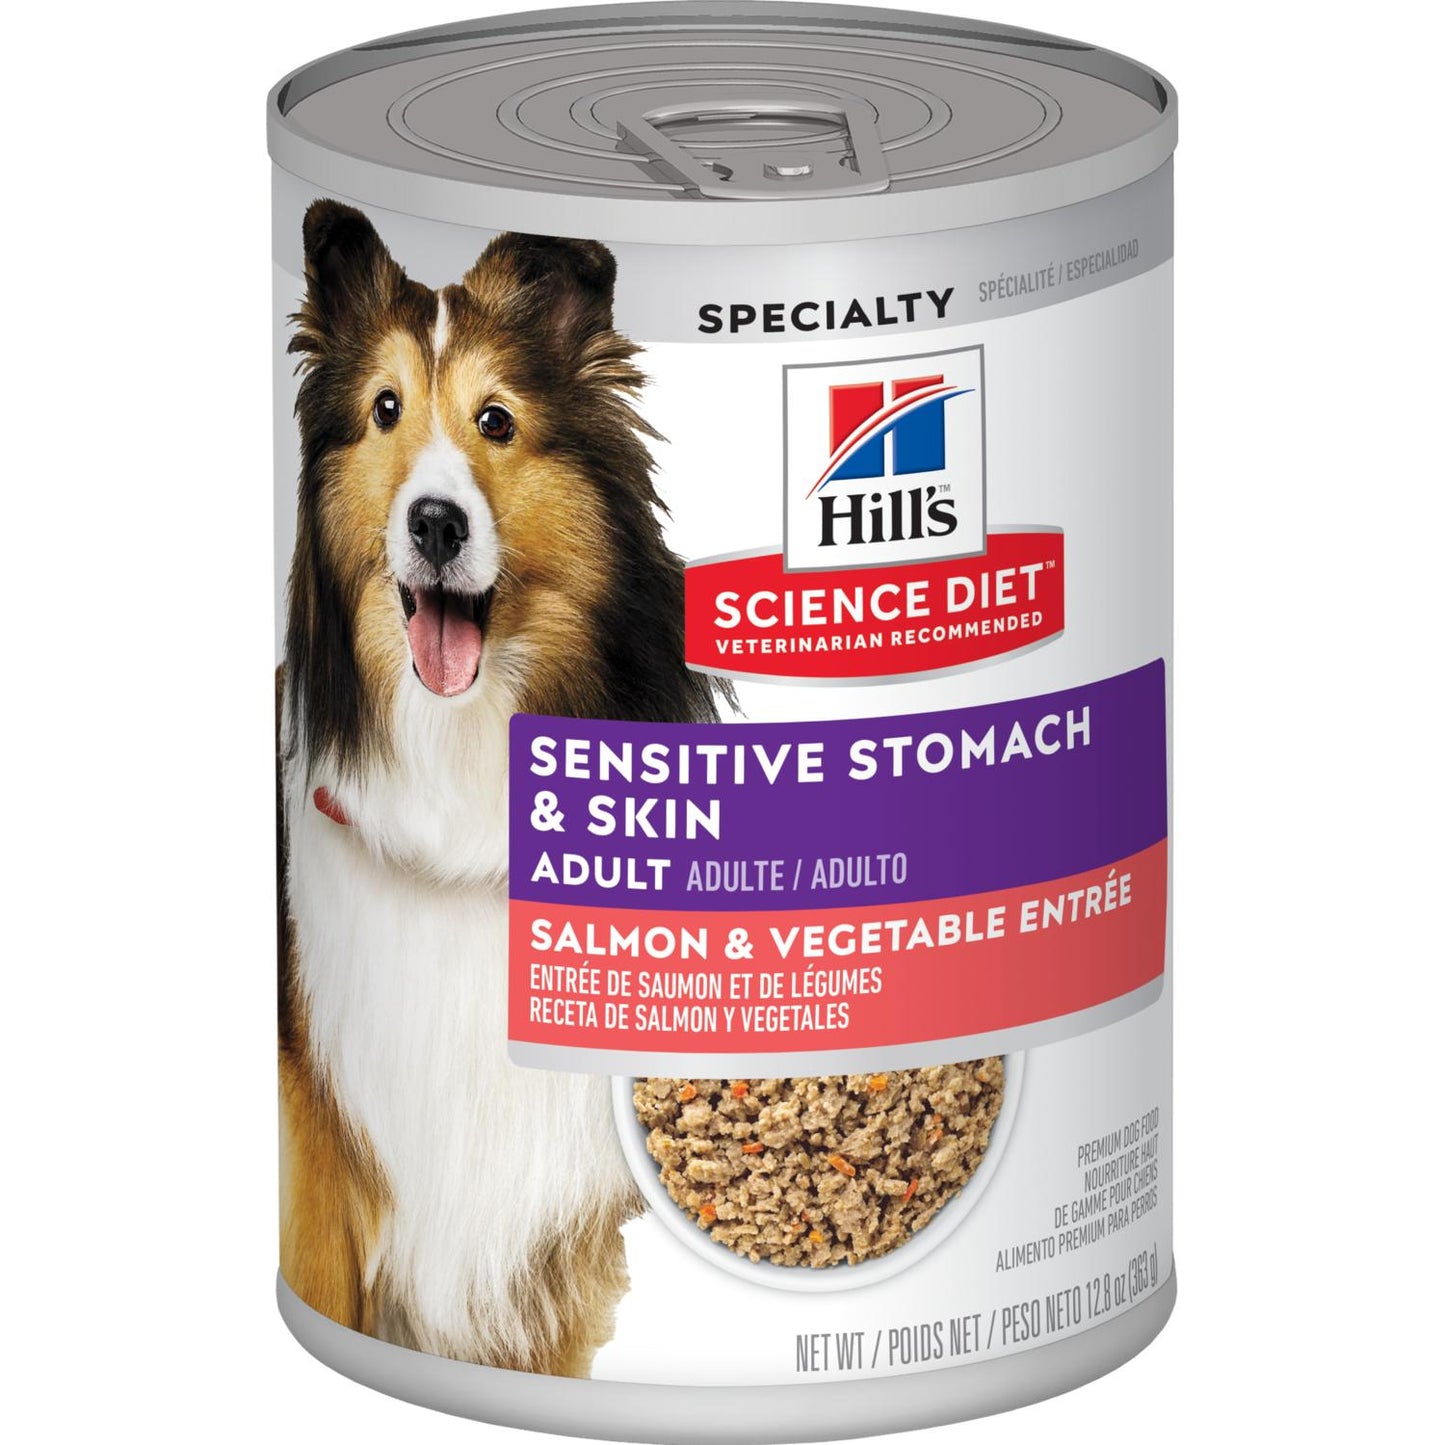 Hill's Science Diet Adult Sensitive Stomach & Skin Salmon & Vegetable Entrée dog food  Canned Dog Food  | PetMax Canada